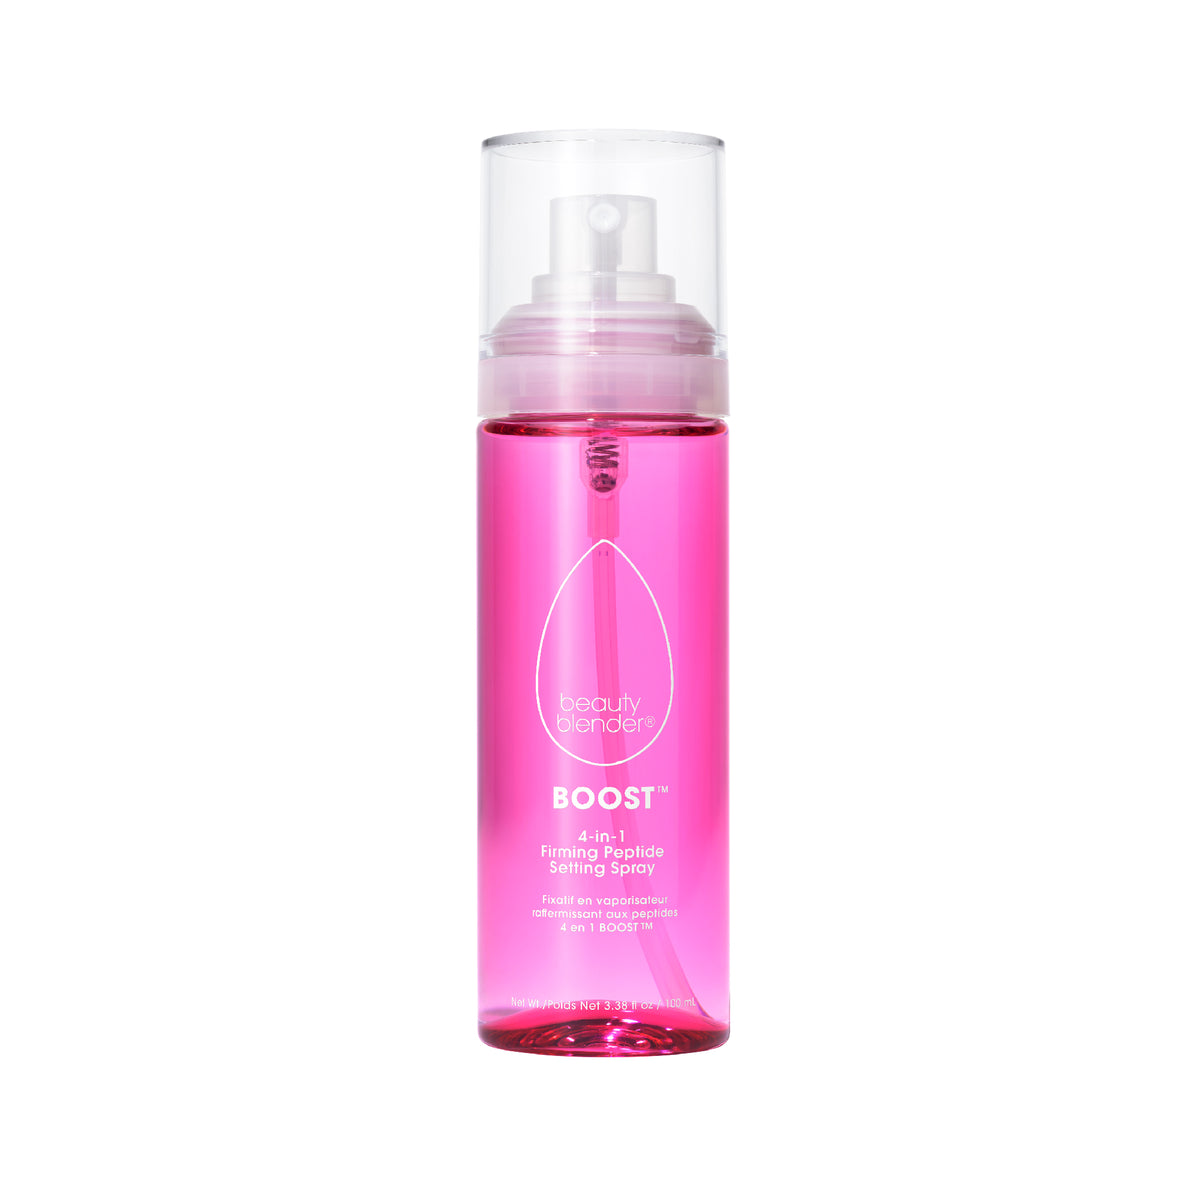 Boost™ 4-in-1 Firming Peptide 18-Hour Setting Spray.